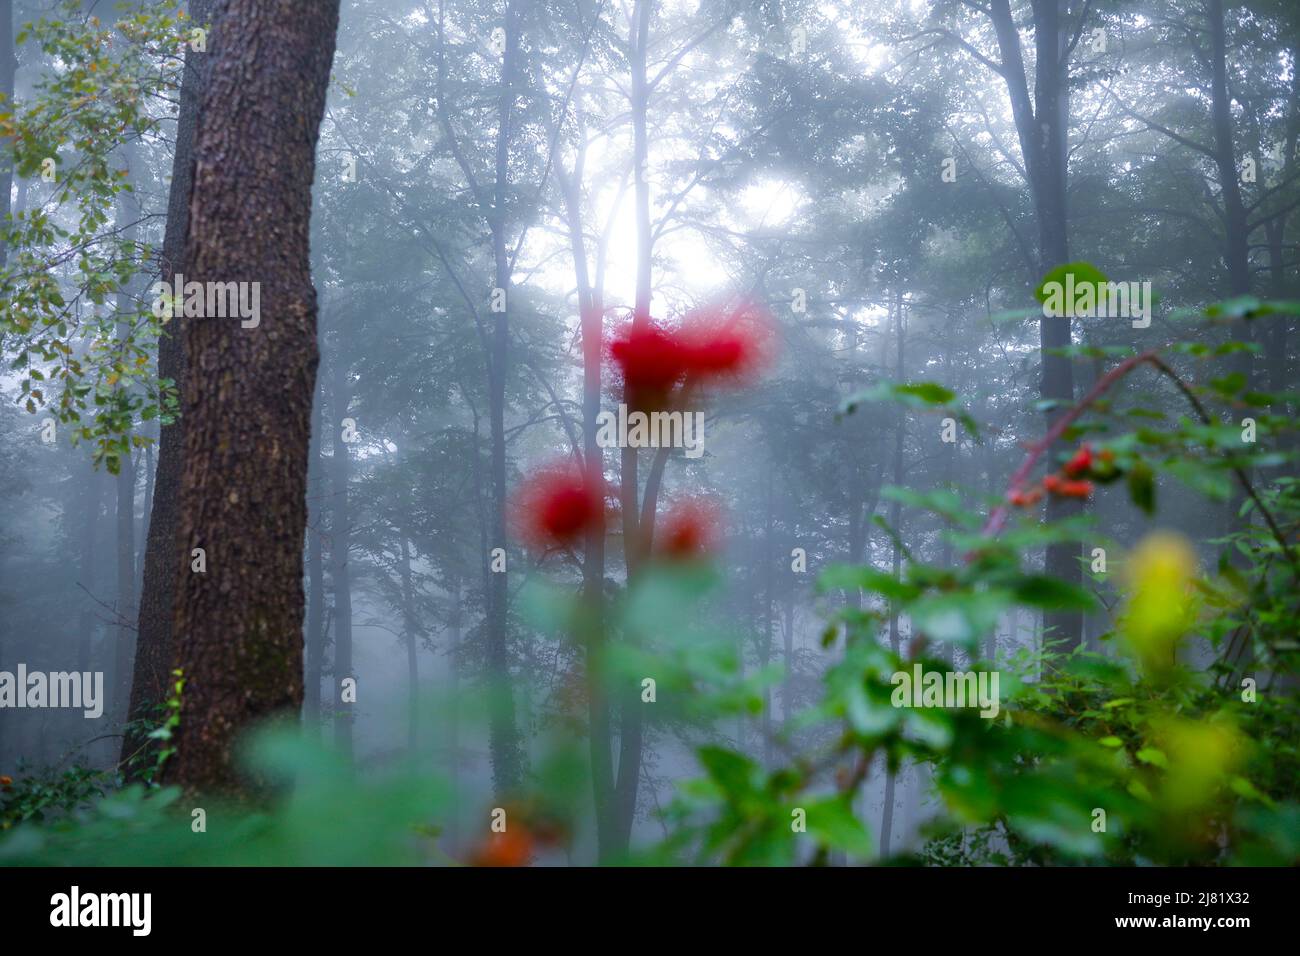 Misty (foggy) forest with blurred berries in the foreground Stock Photo